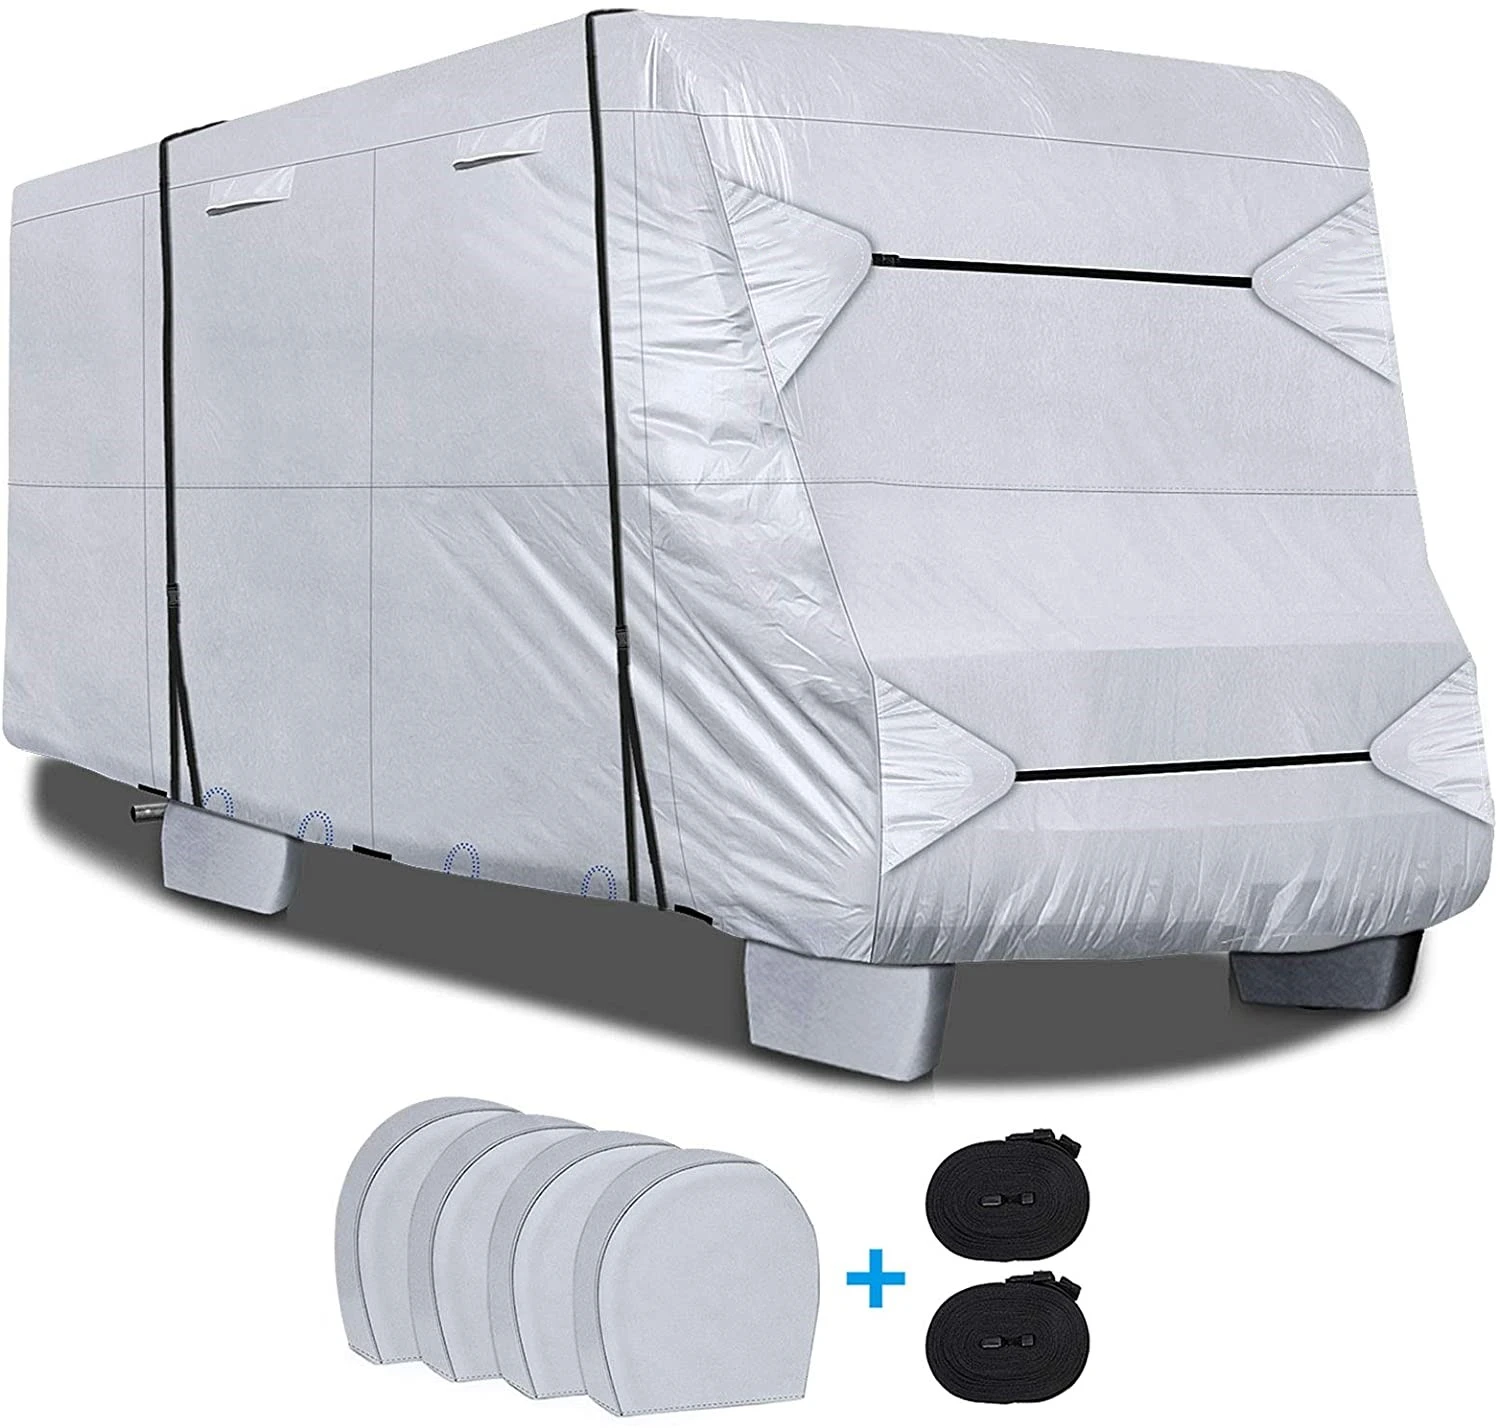 

Quality Guarantee Polypropylene Motorhome UV Proof Waterproof RV Cover Class C Camper Cover